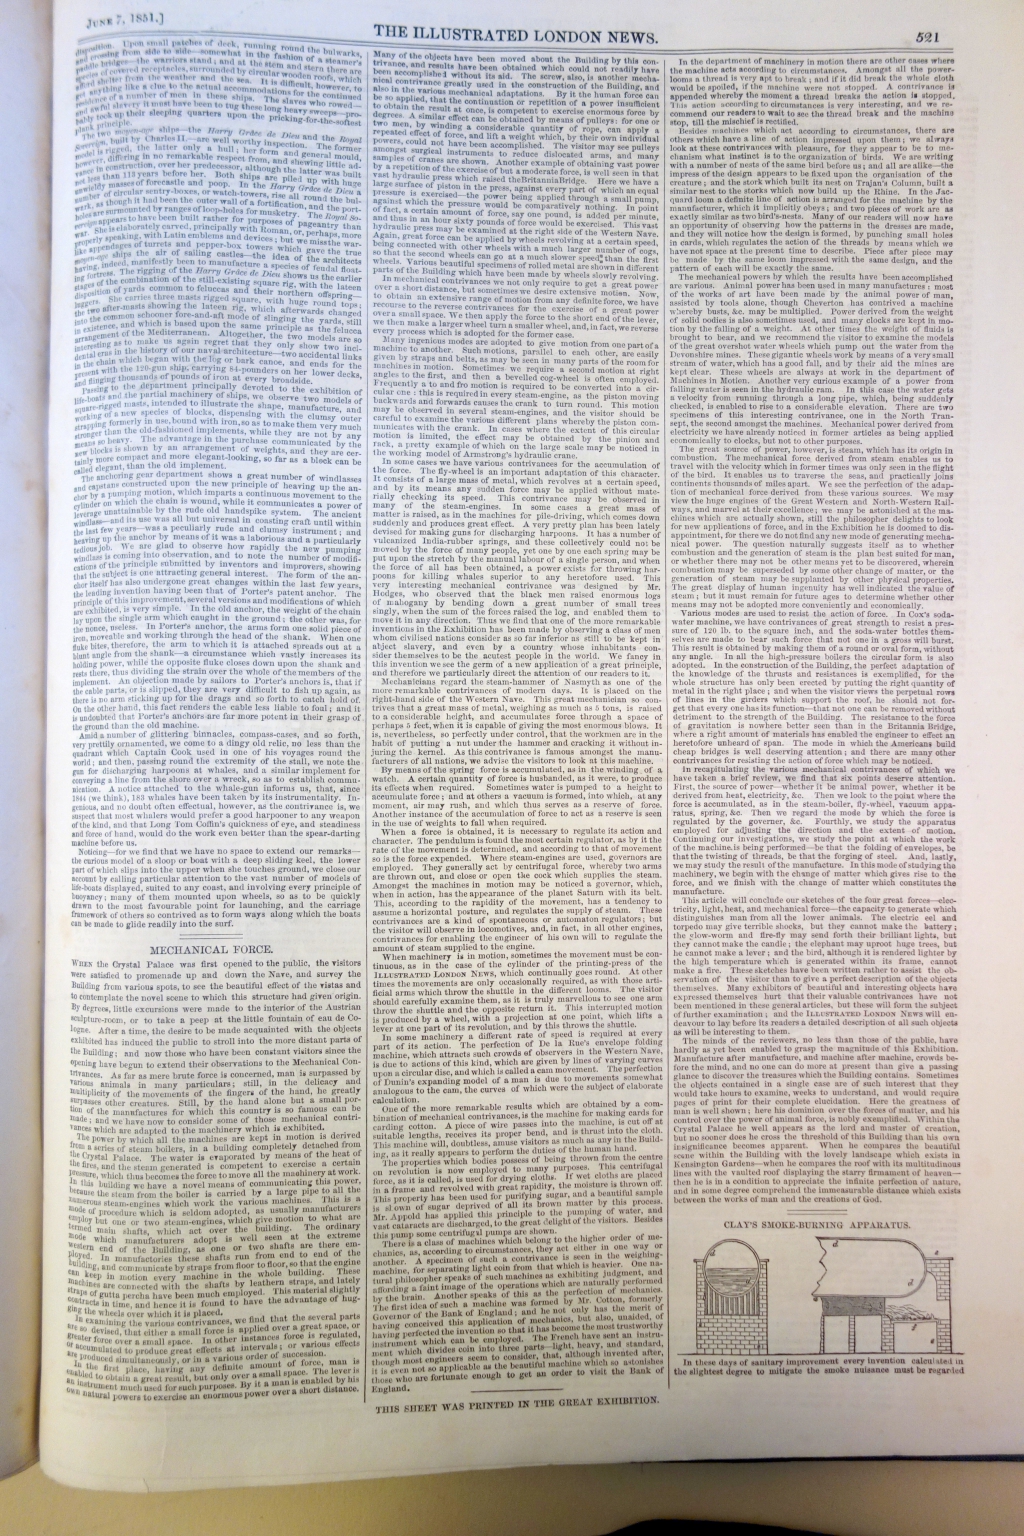 Illustrated London News sheet printed during Great Exhibition